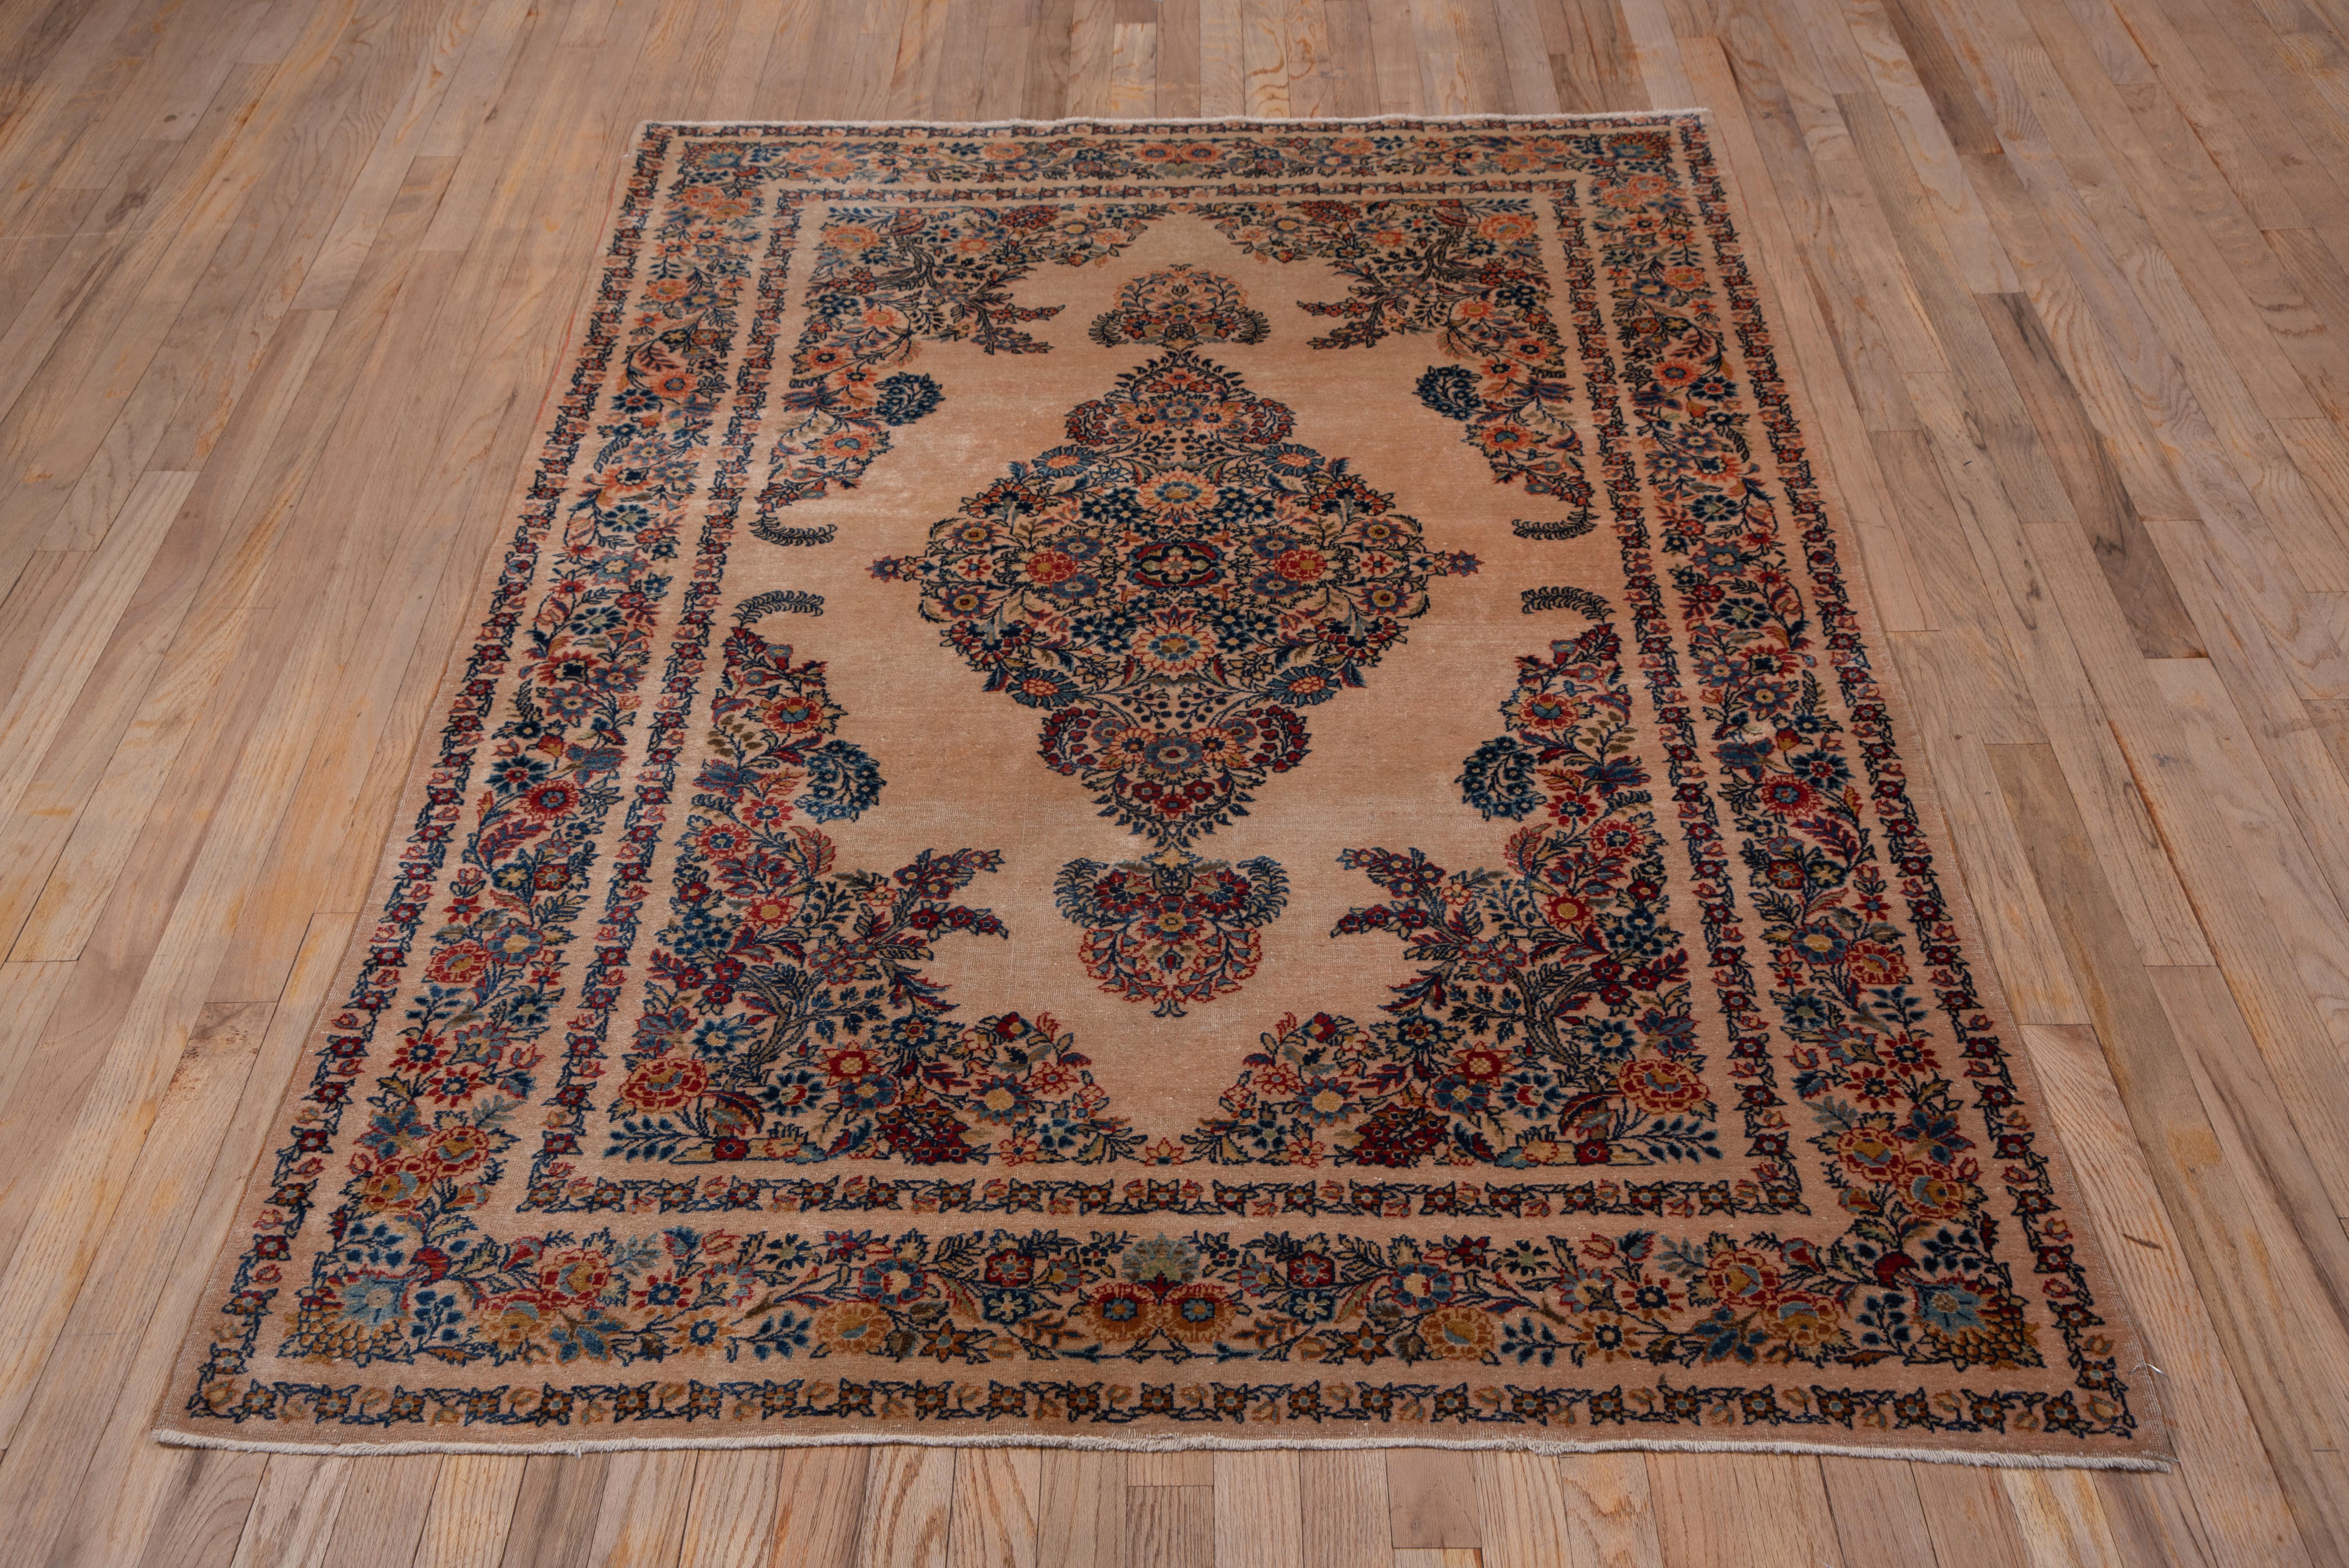 In the popular Kerman style with a side to side creamy beige open field and en suite medallion and corners composed of closely set floral sprays, this central Persian town rug has a fine weave and velvety short, erect pile. The floral borders show